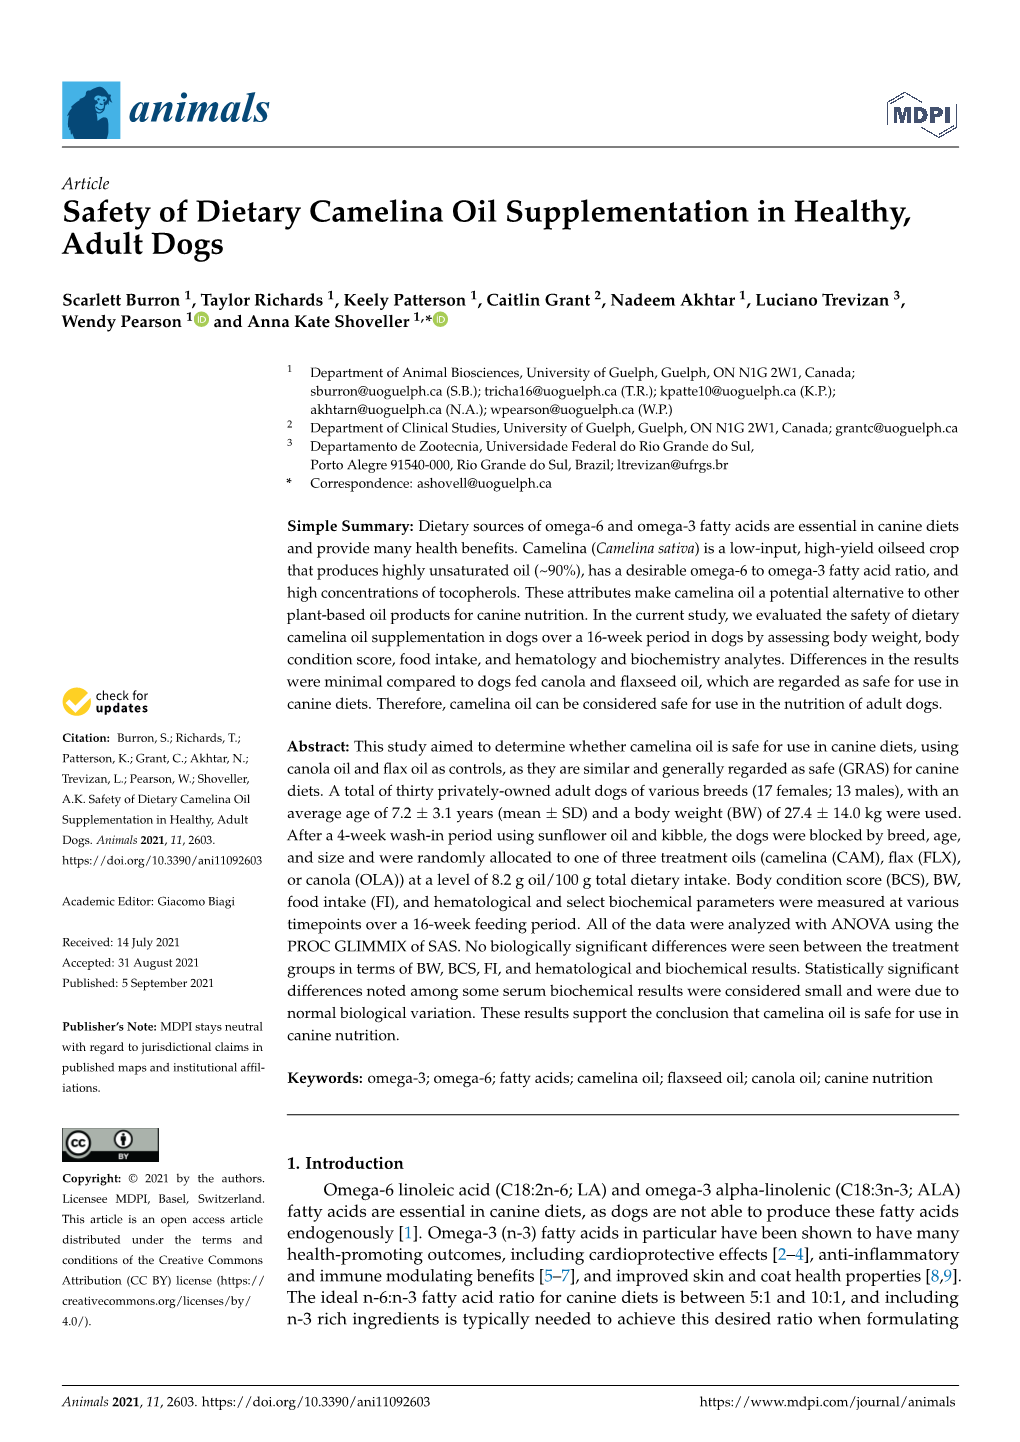 Safety of Dietary Camelina Oil Supplementation in Healthy, Adult Dogs